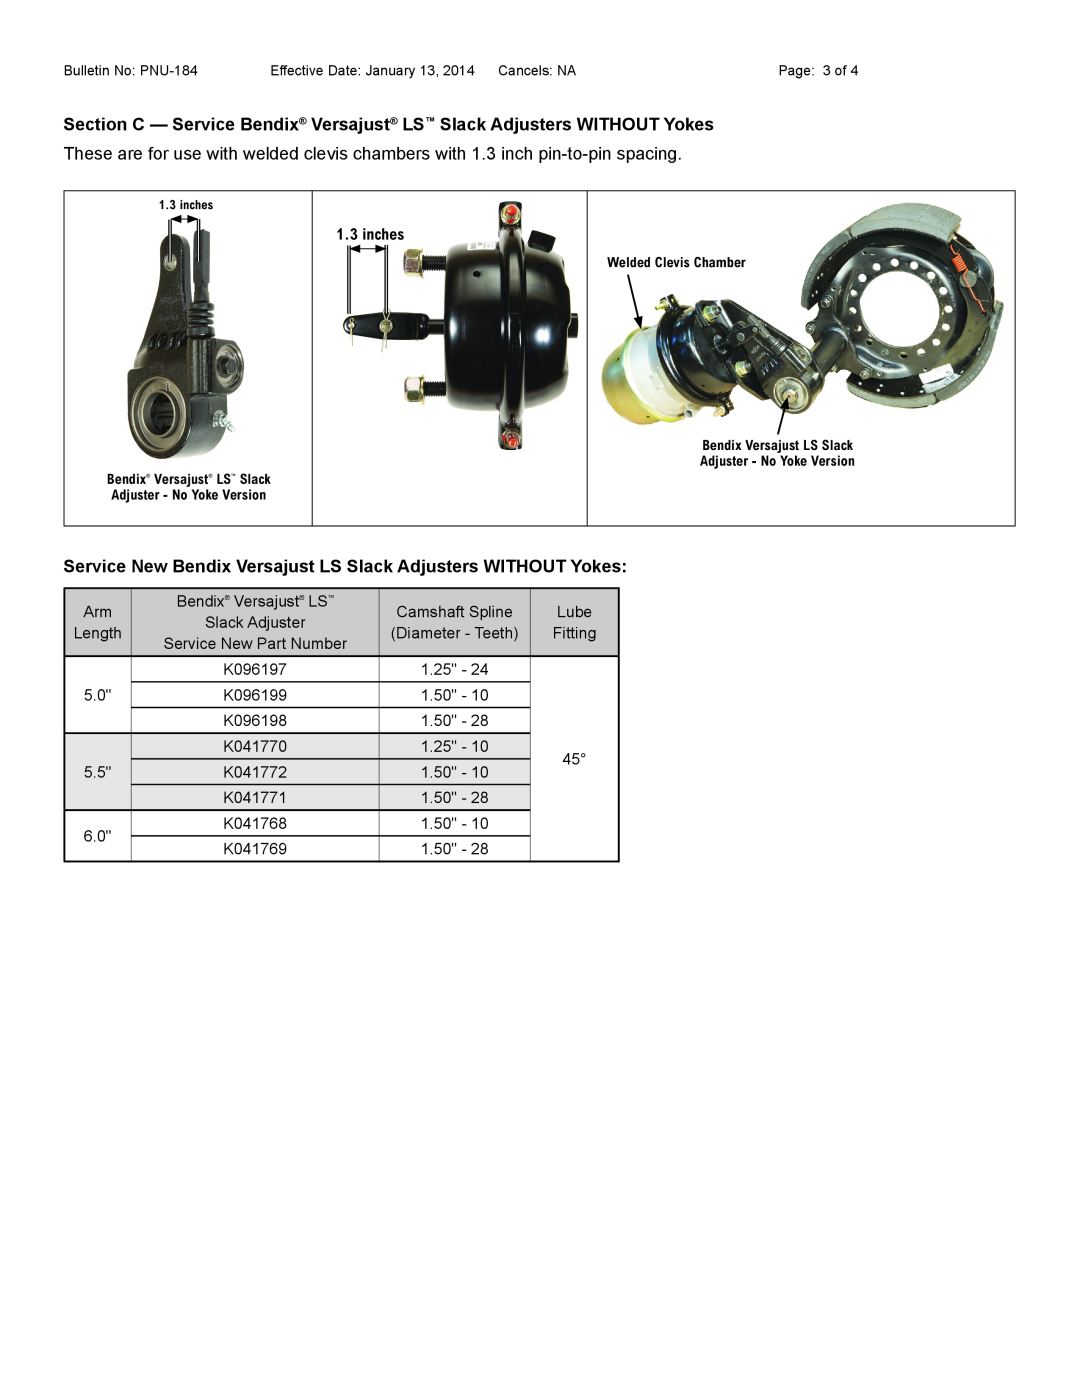 BENDIX PNU-184 manual Section C - Service Bendix Versajust LS Slack Adjusters WITHOUT Yokes, inches, Welded Clevis Chamber 